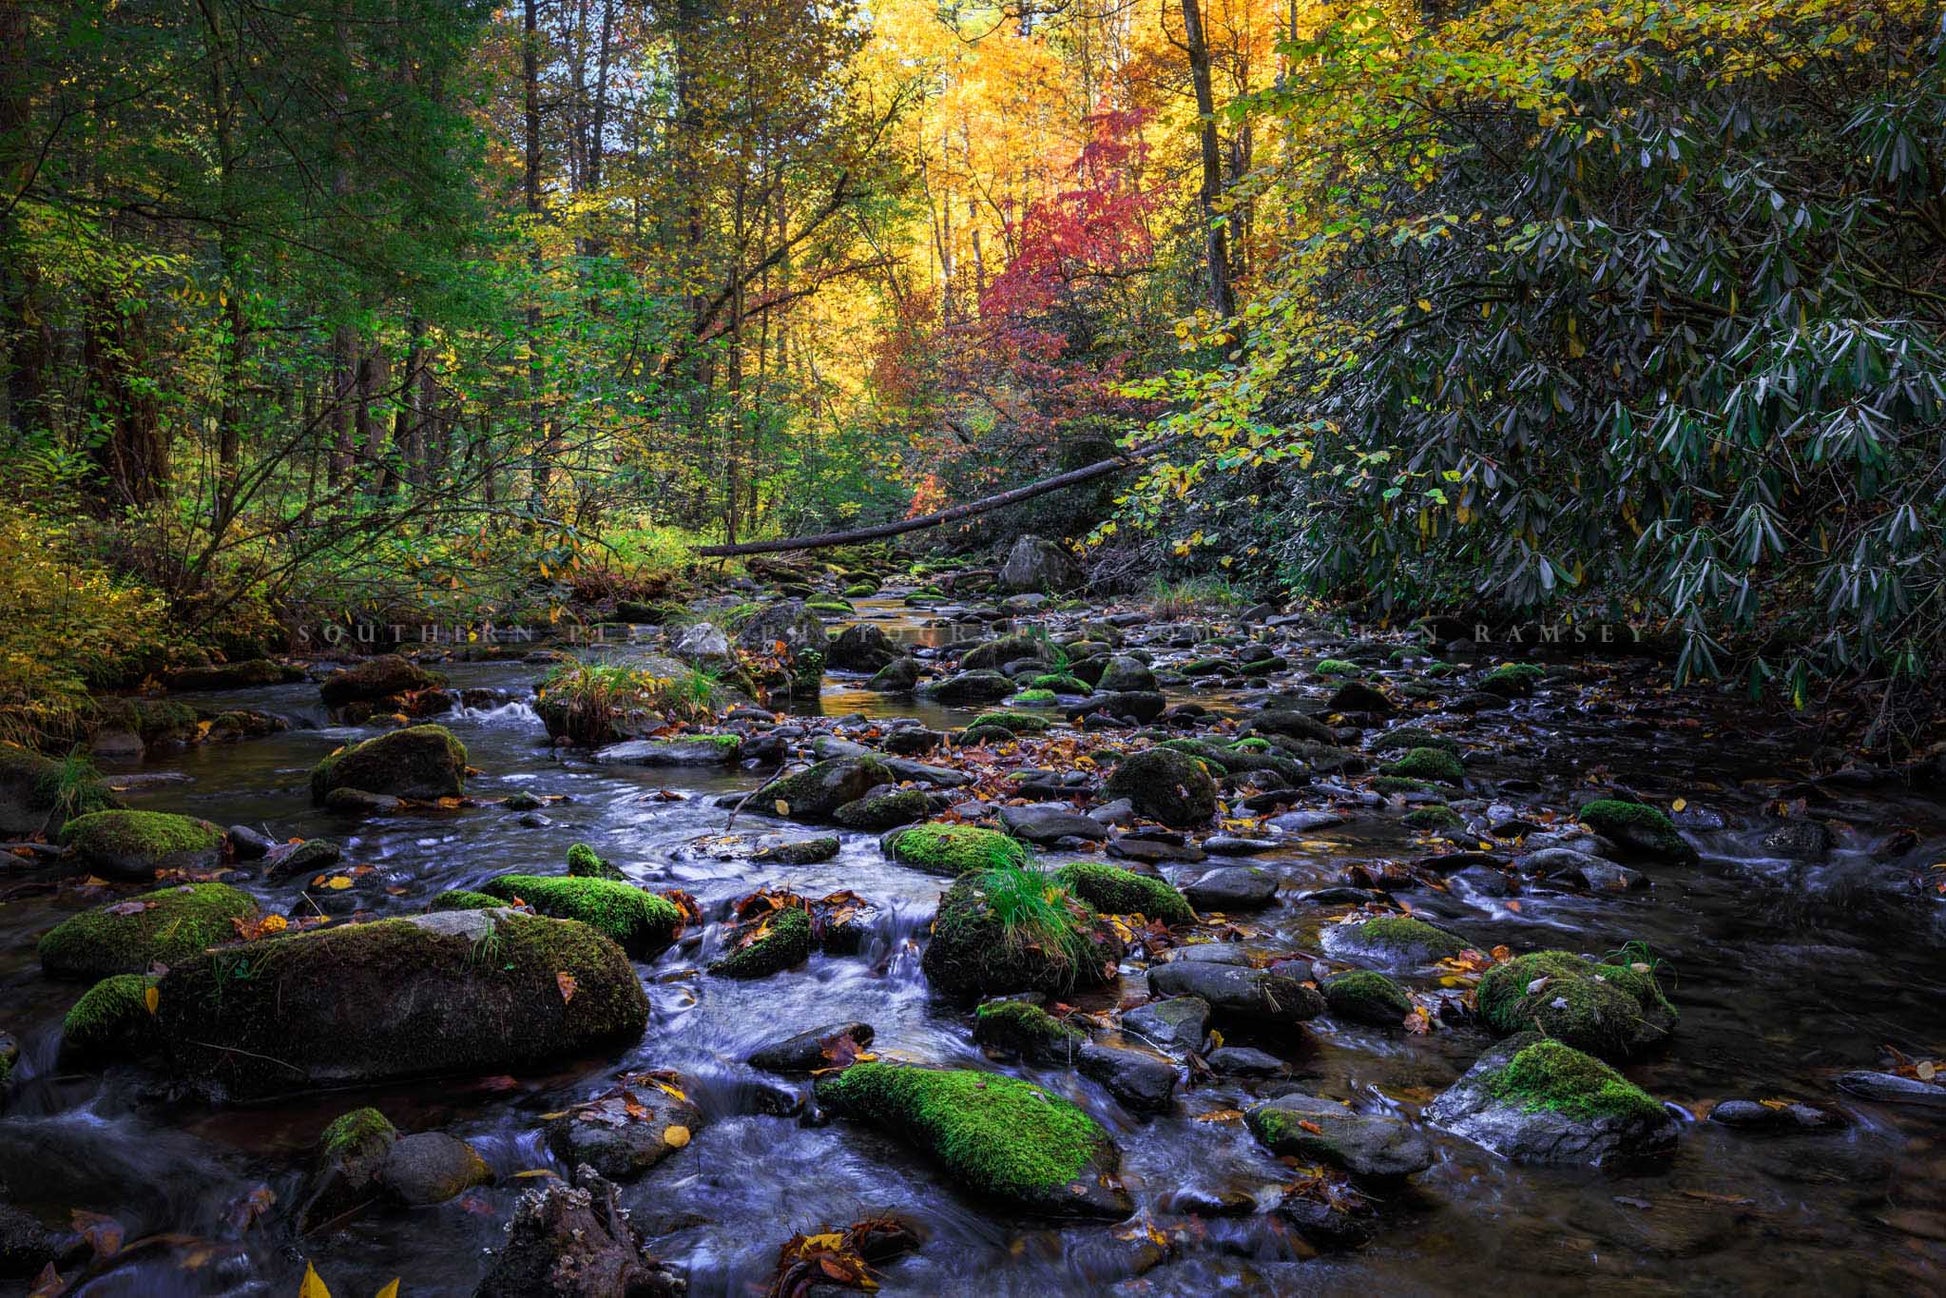 Forest photography print of a creek flowing over rocks with moss and trees full of fall color on an autumn day in Great Smoky Mountains National Park, Tennessee by Sean Ramsey of Southern Plains Photography.